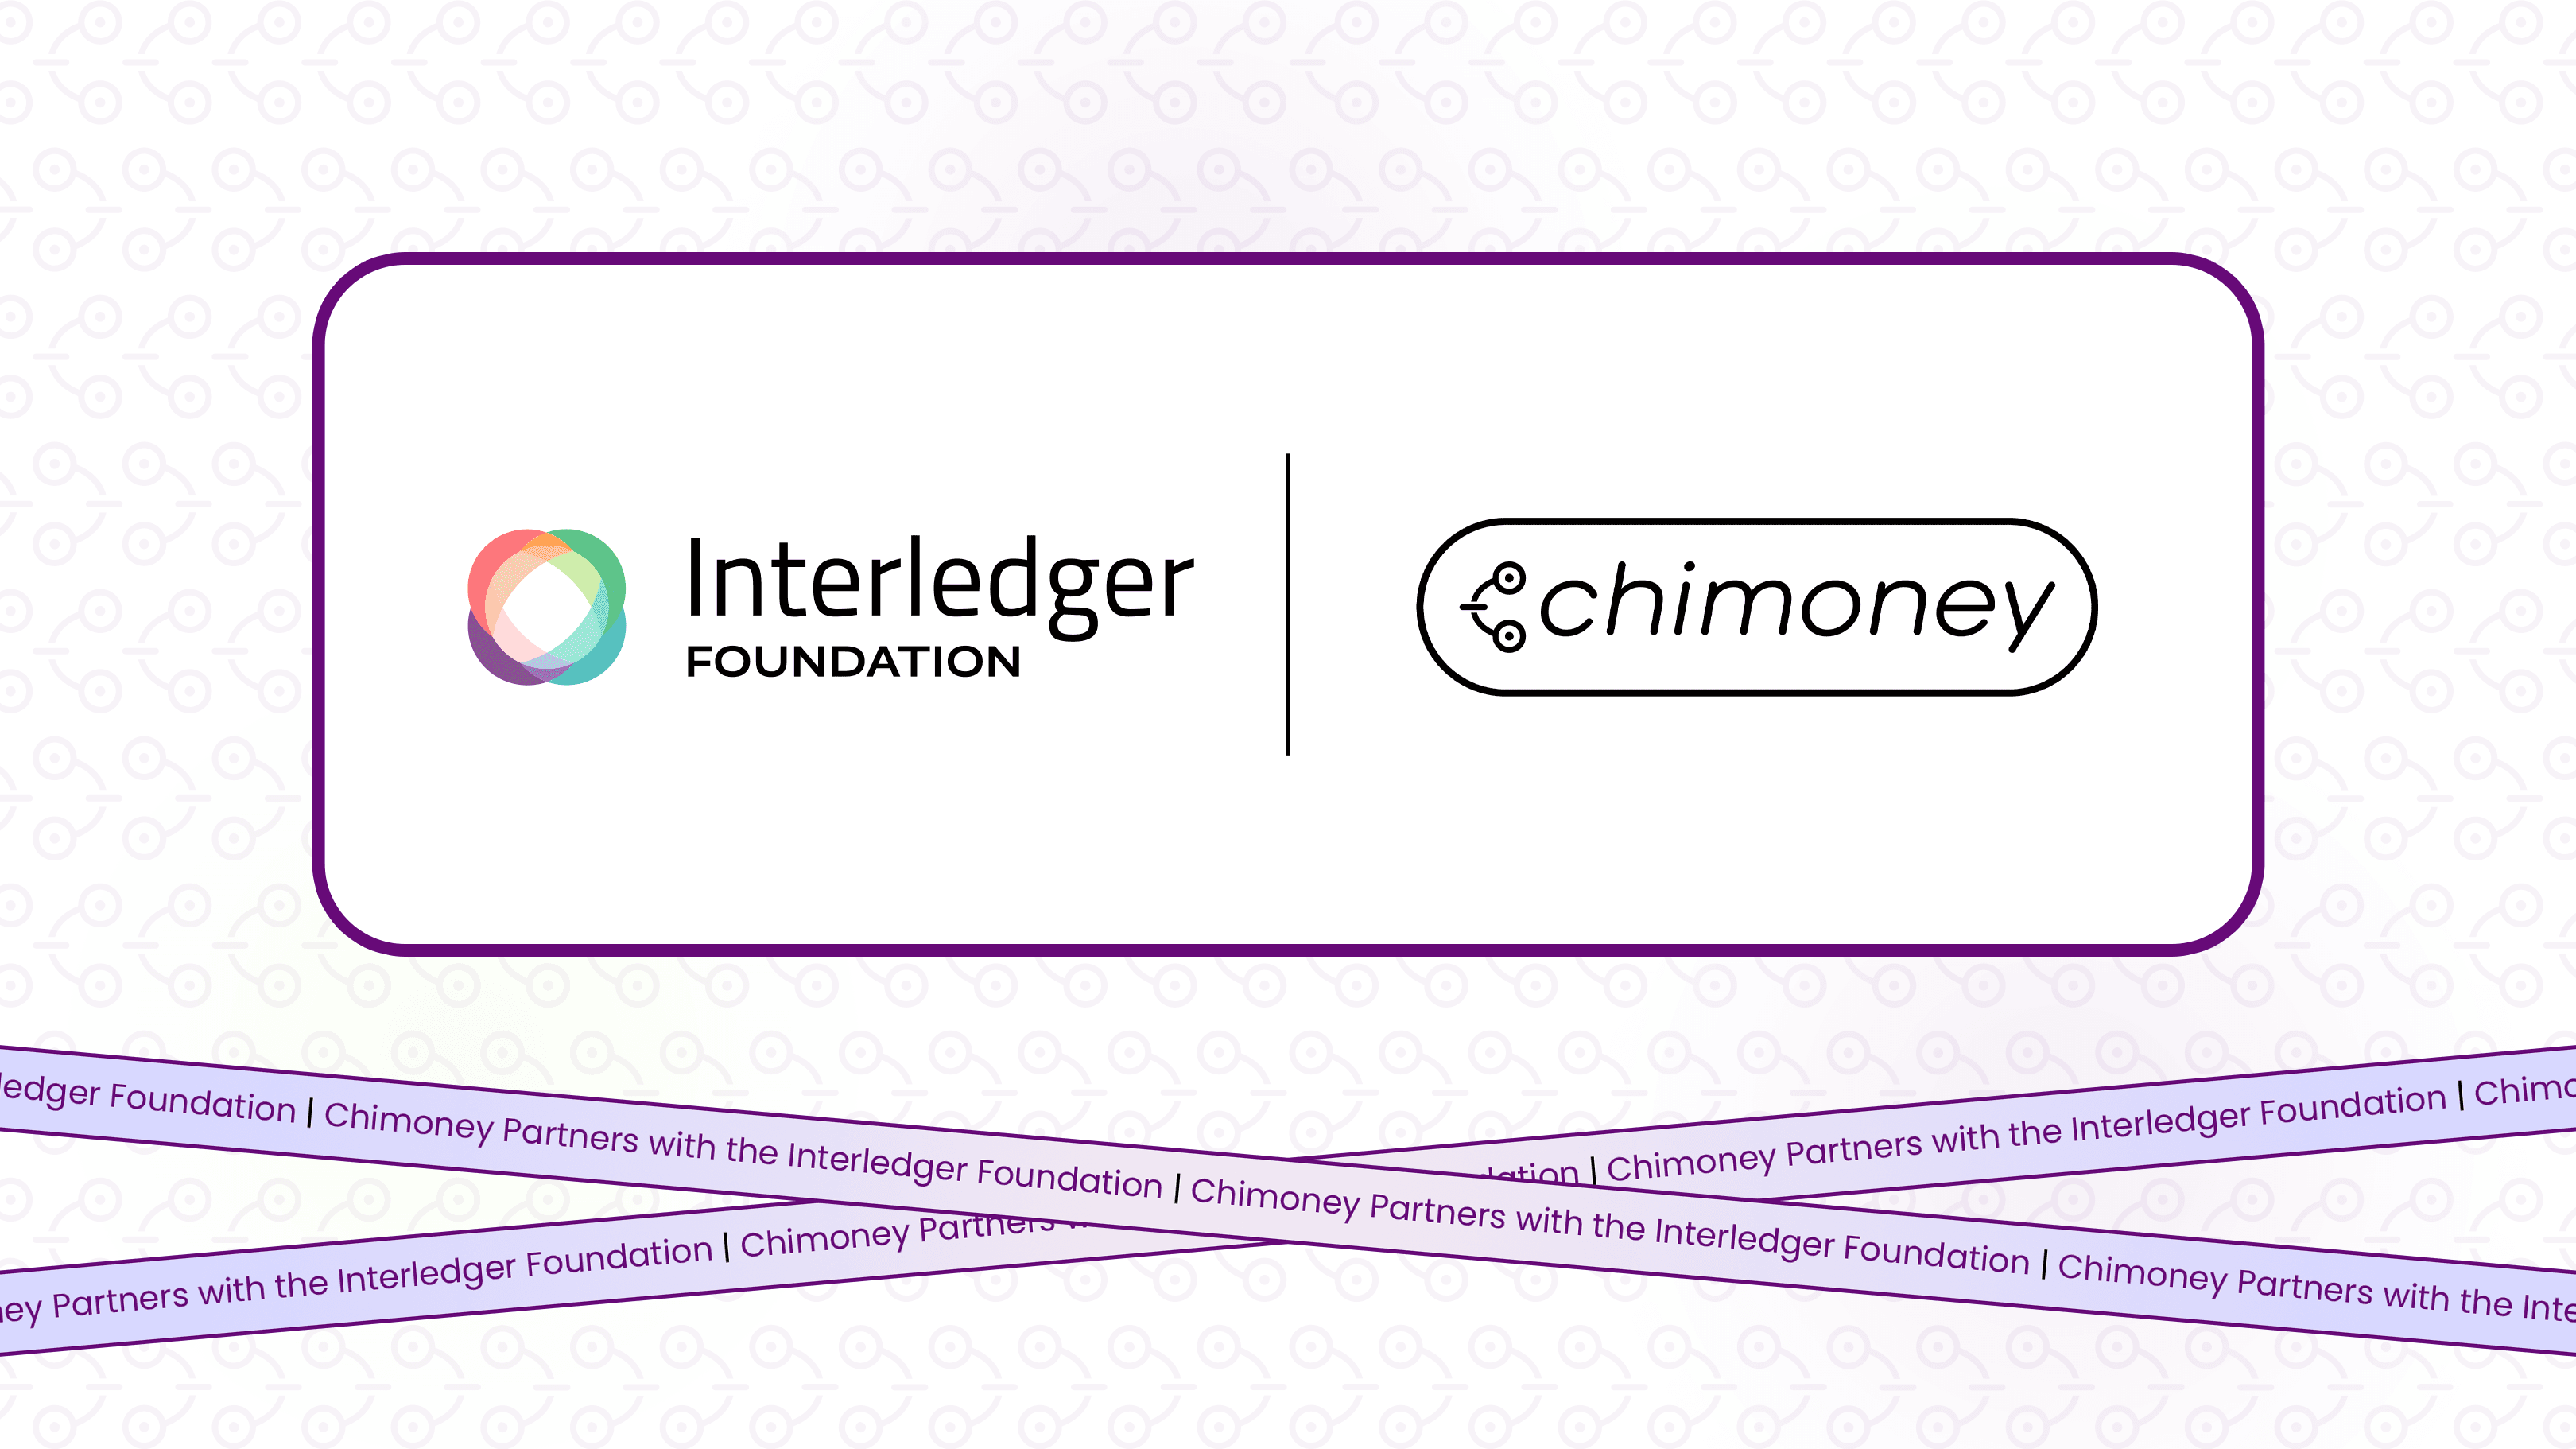 Chimoney & Interledger: Bridging Global Payment Systems for the Future